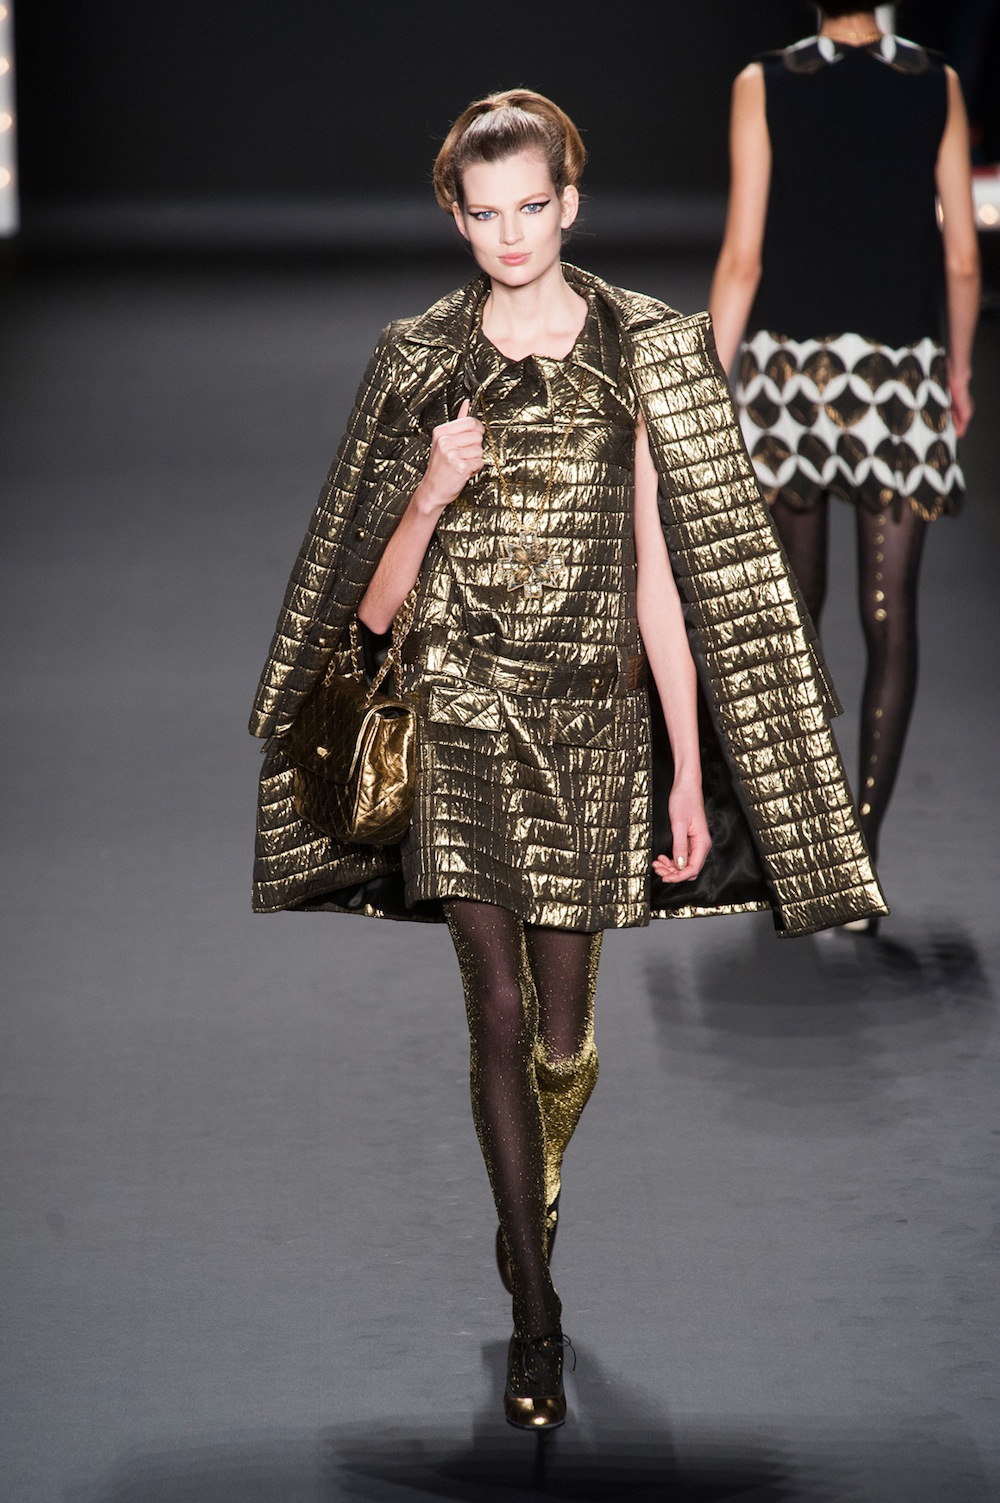 Liquid Assets: Holiday-Ready Metallics to Wear All Winter - theFashionSpot